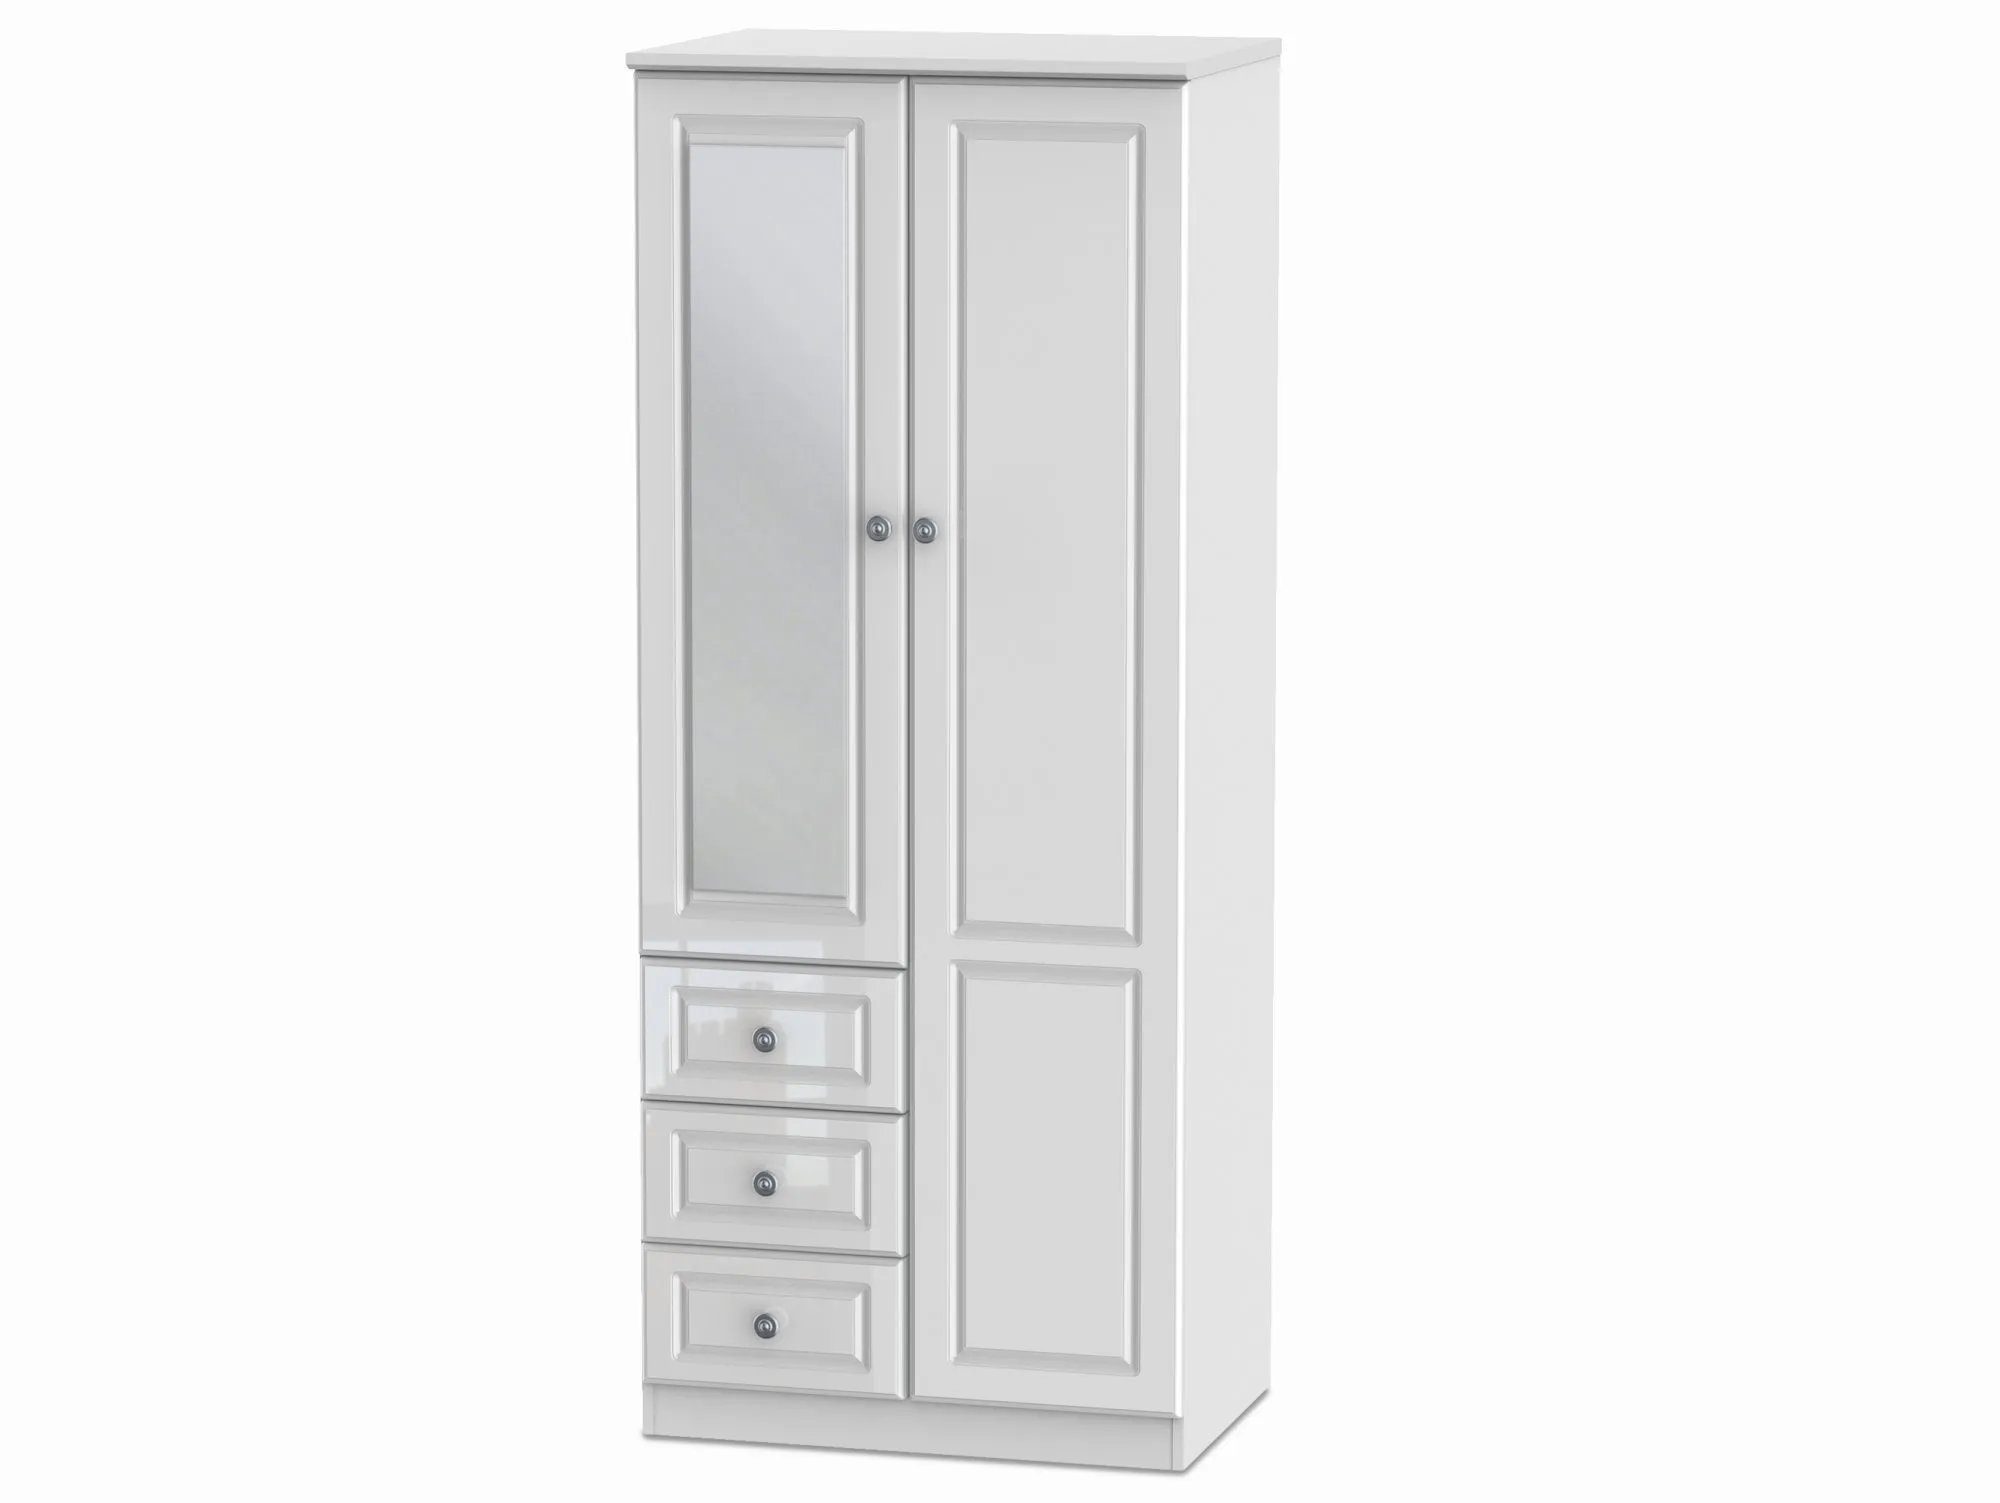 Welcome Welcome 2ft6 Pembroke White High Gloss 2 Door 3 Drawer Mirrored Double Wardrobe (Assembled)